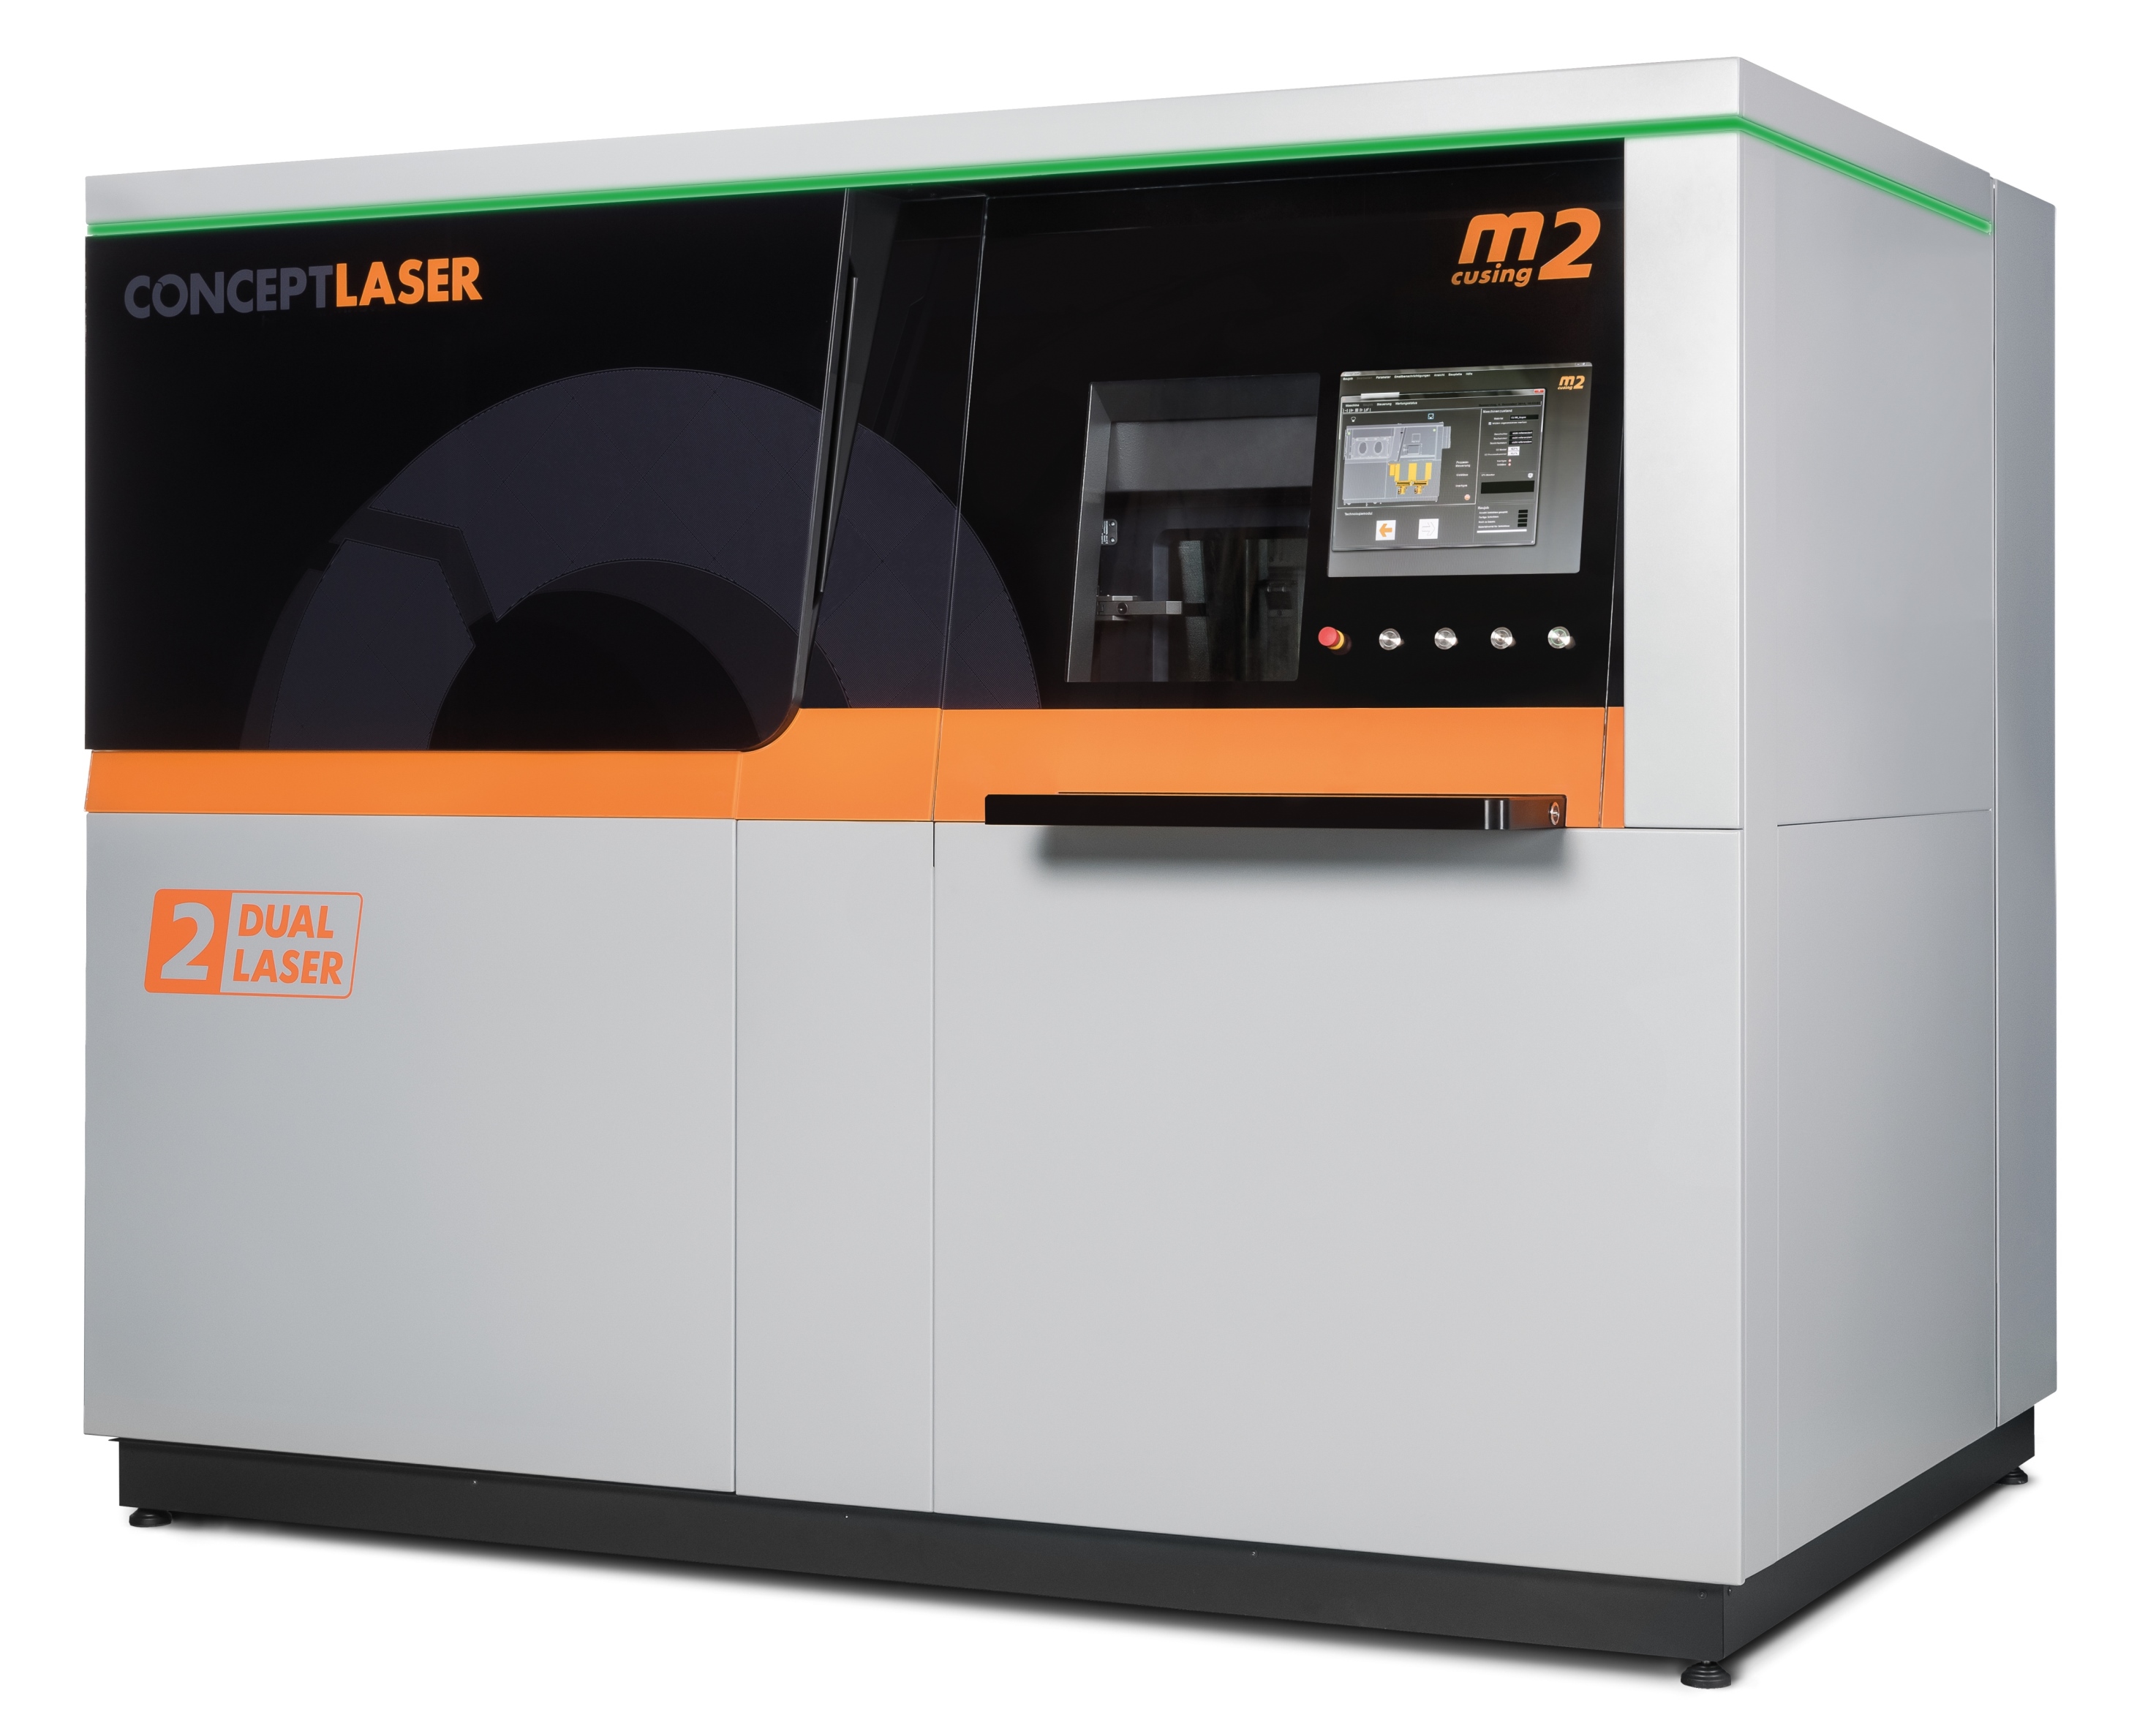 The M2 cusing Multilaser from Concept Laser; Image: Concept Laser